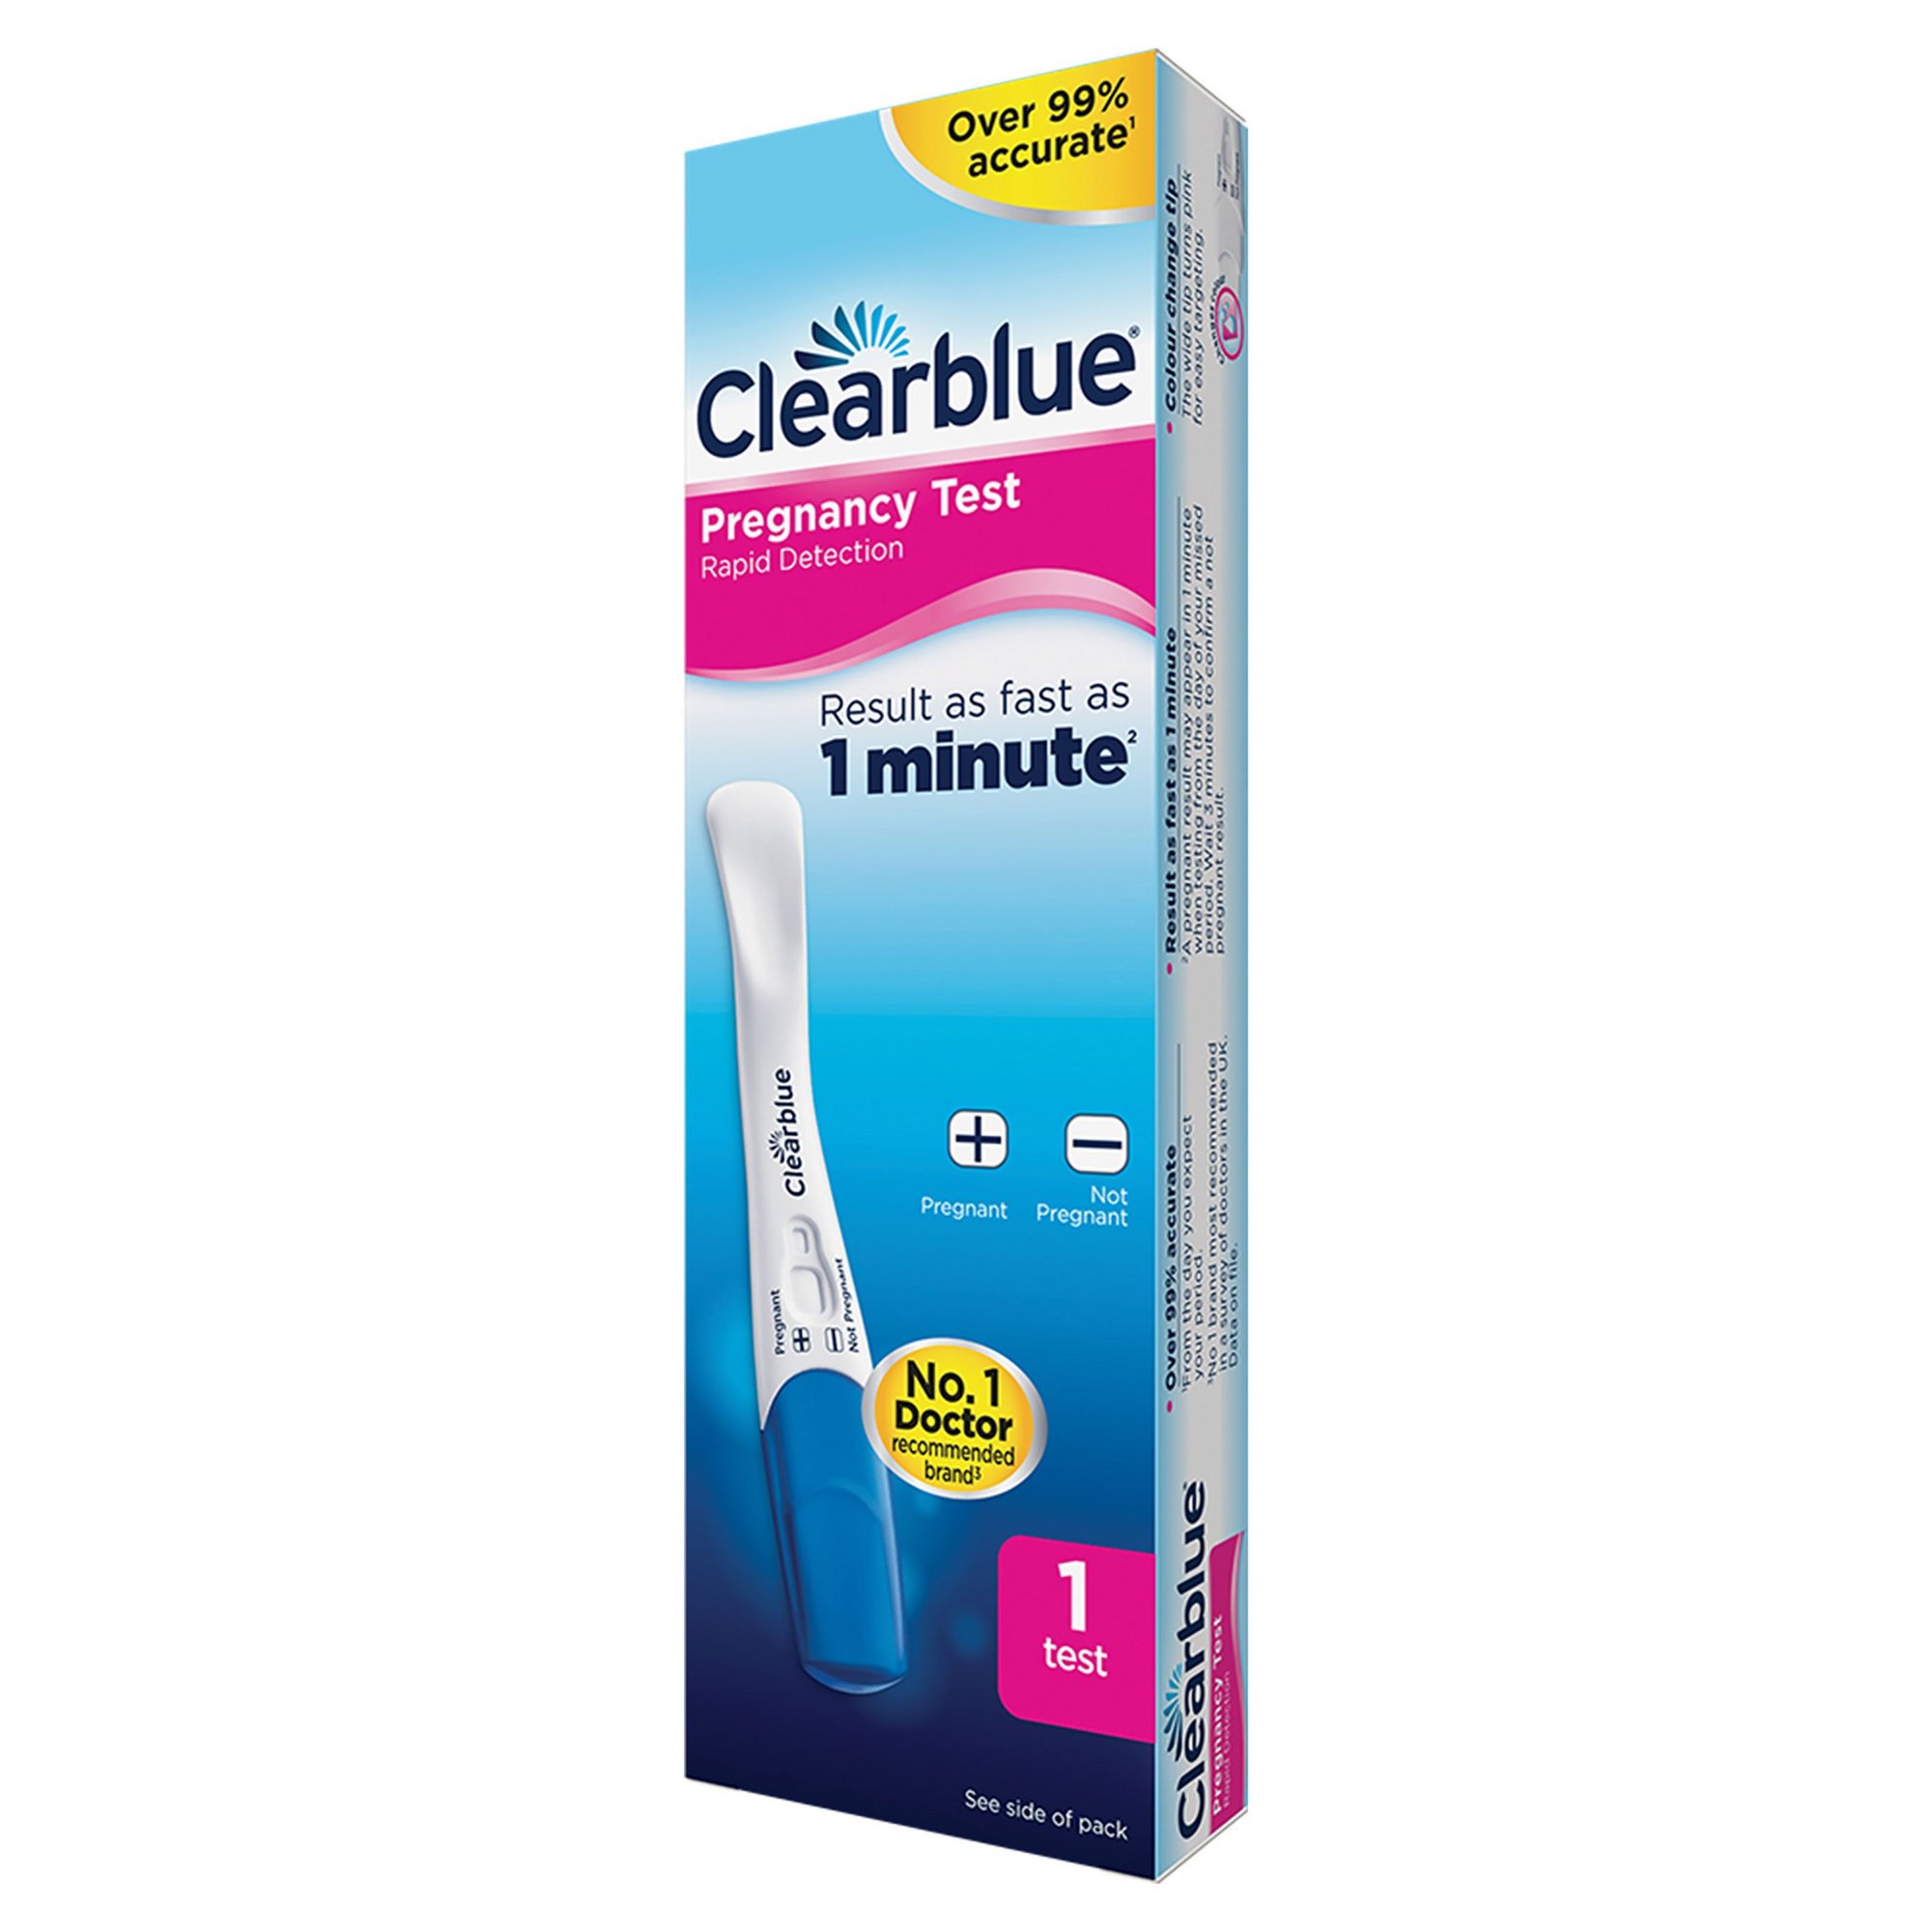 Image of Clearblue Rapid Detection Pregnancy Test (1 Test)